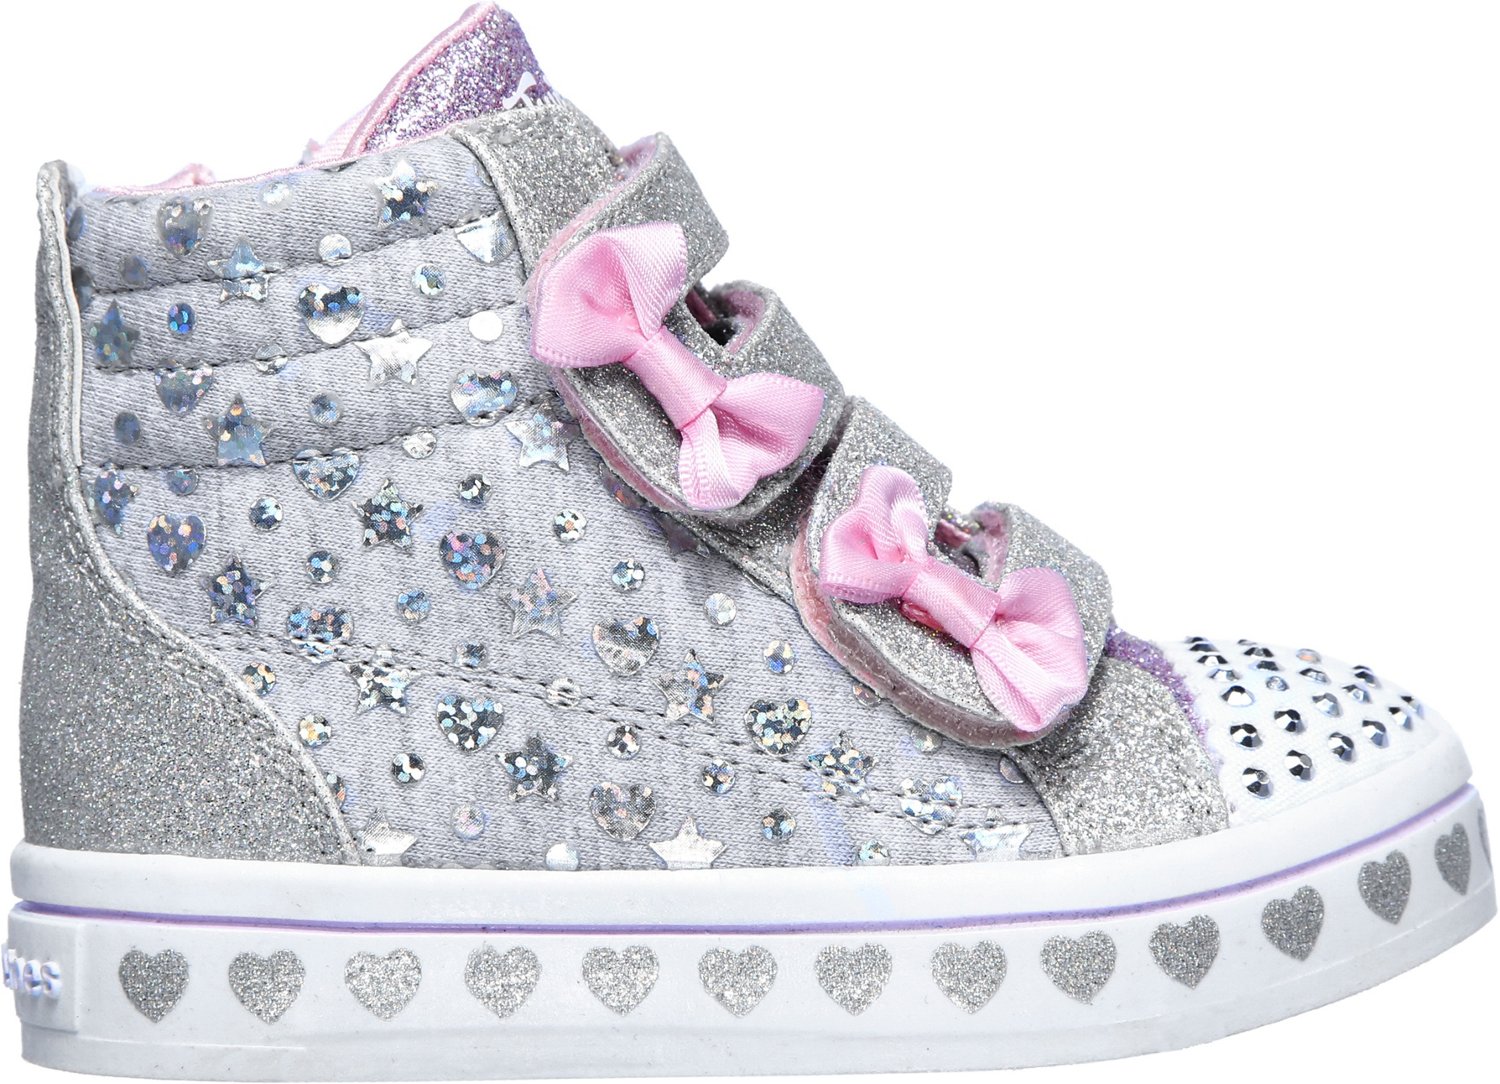 SKECHERS Toddler Girls' Twinkle Toes Twi-Lites Heather & Shine Shoes ...